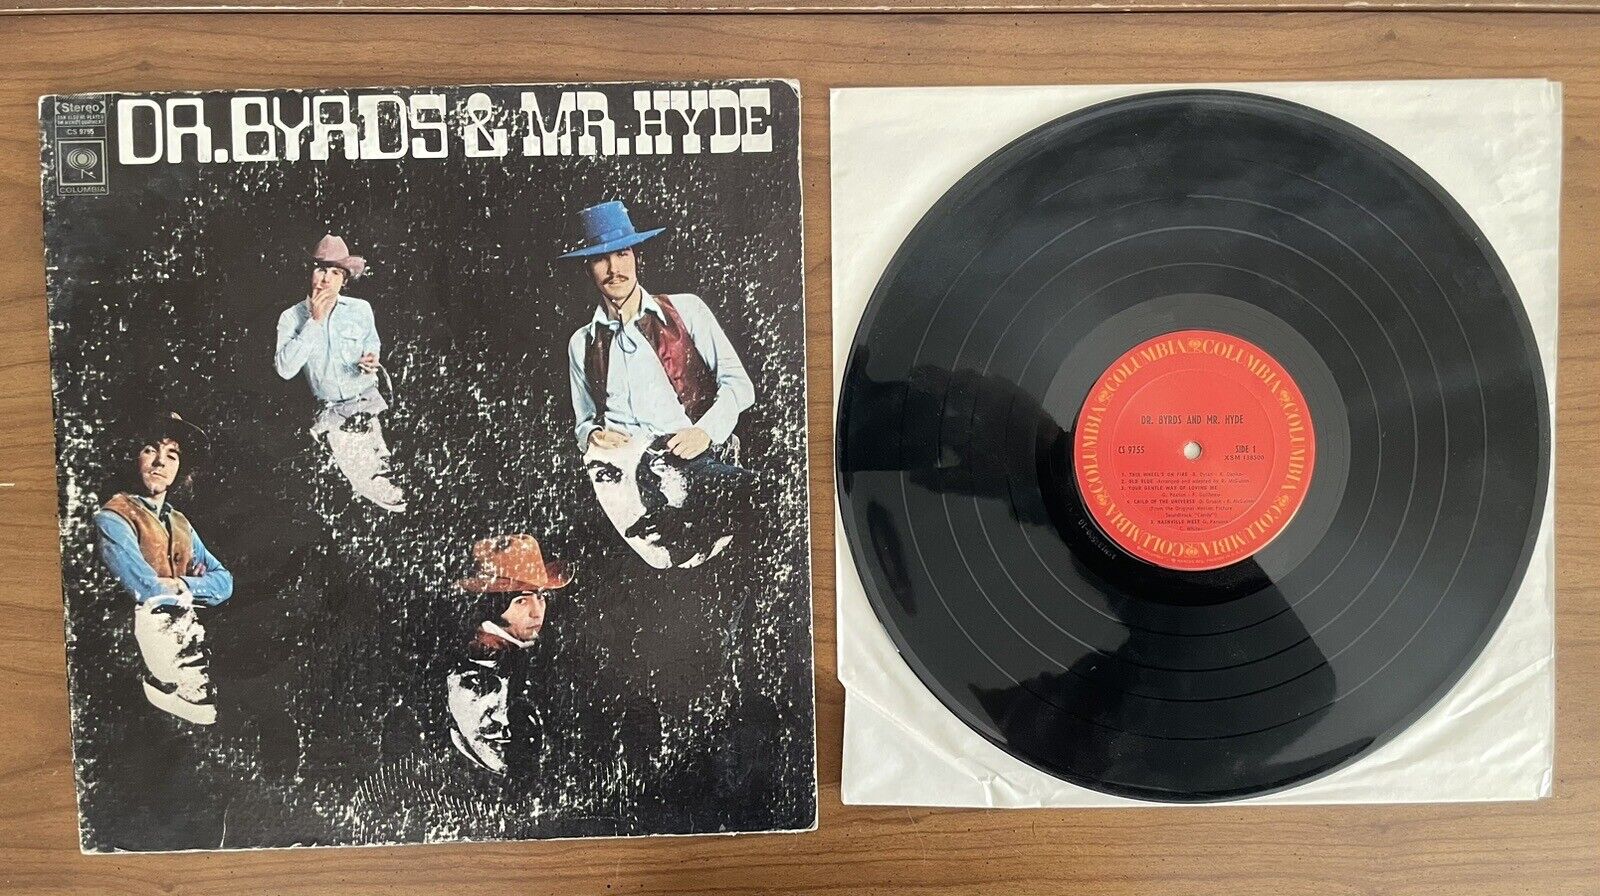 The Byrds  Dr. Byrds & Mr. Hyde  1969  Columbia CS 9755  Rare Psychedelic Rock